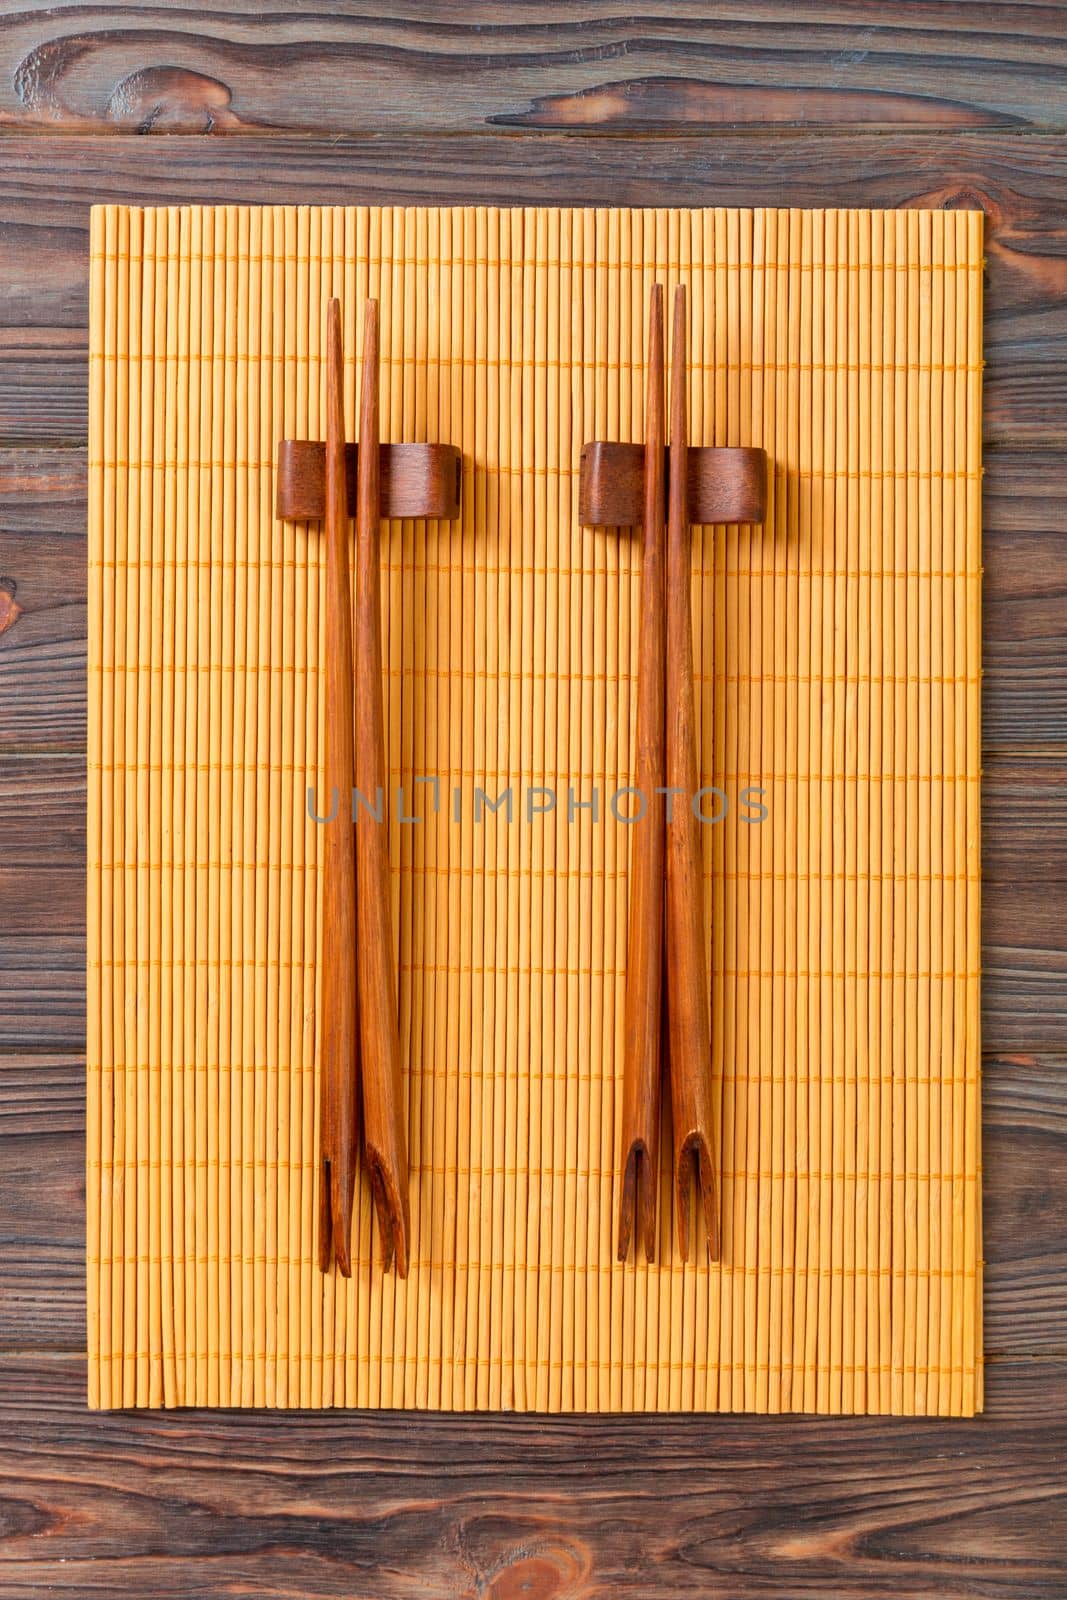 two sets of sushi chopsticks on wooden bamboo background, top view.